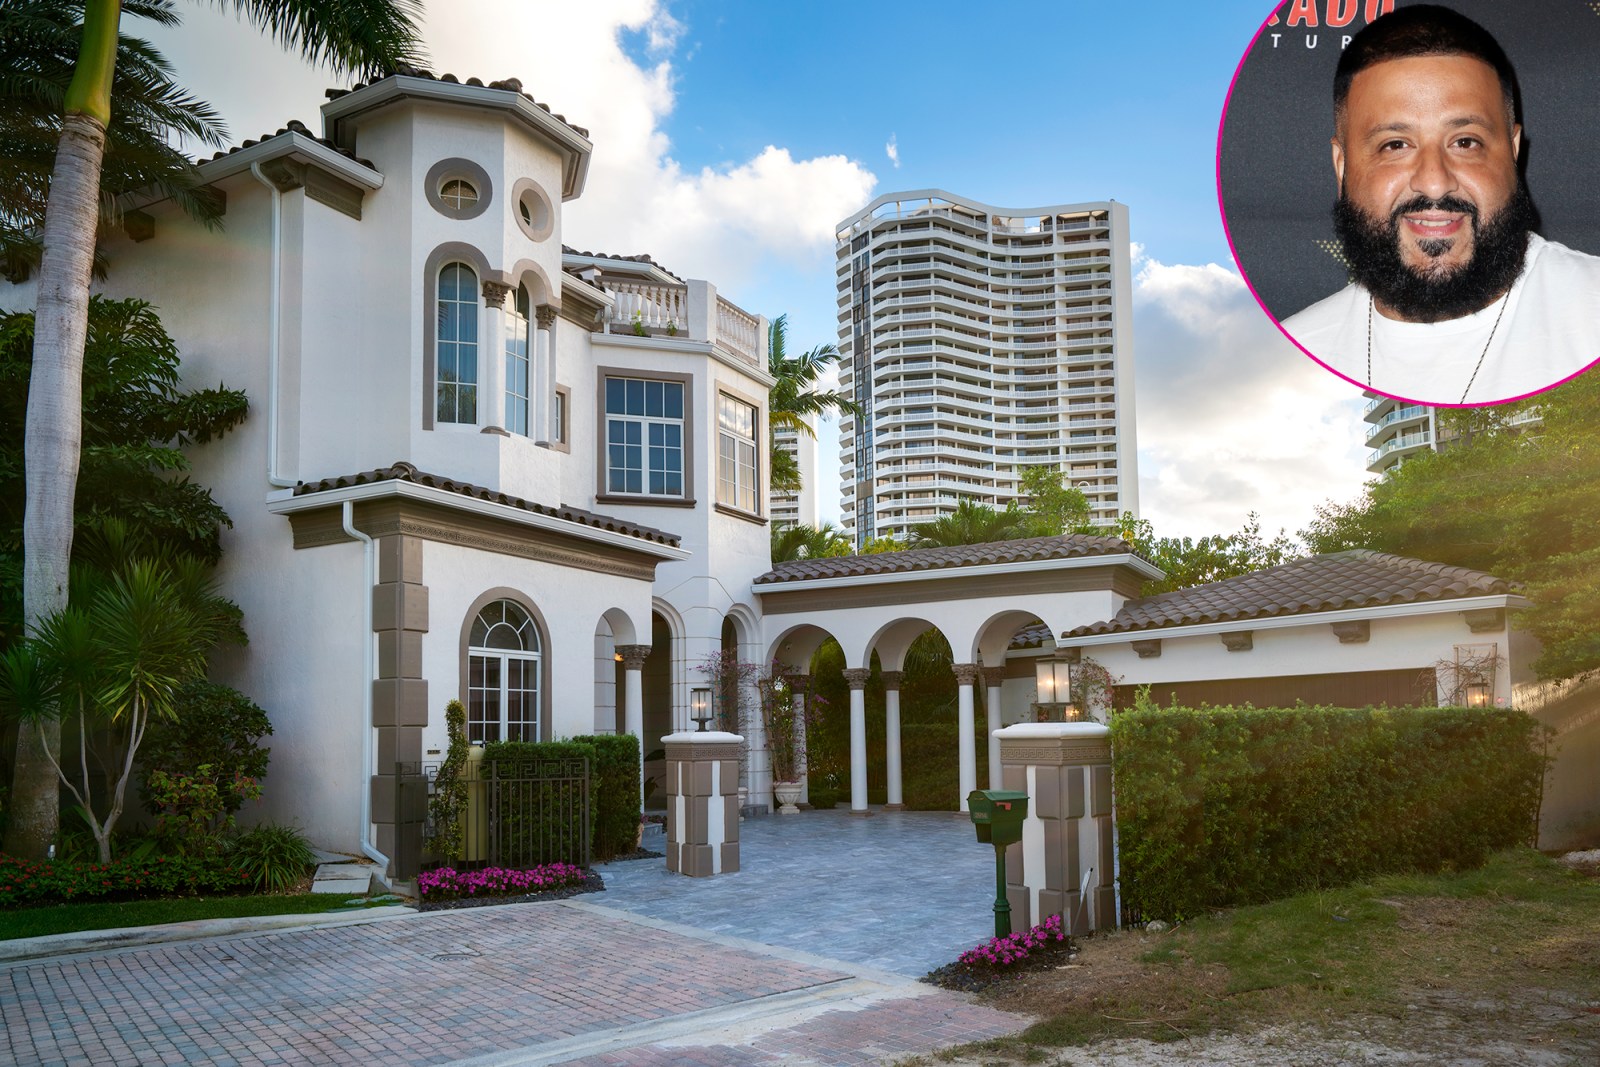 DJ Khaled Is Selling His 8 Million Waterfront Estate in Florida